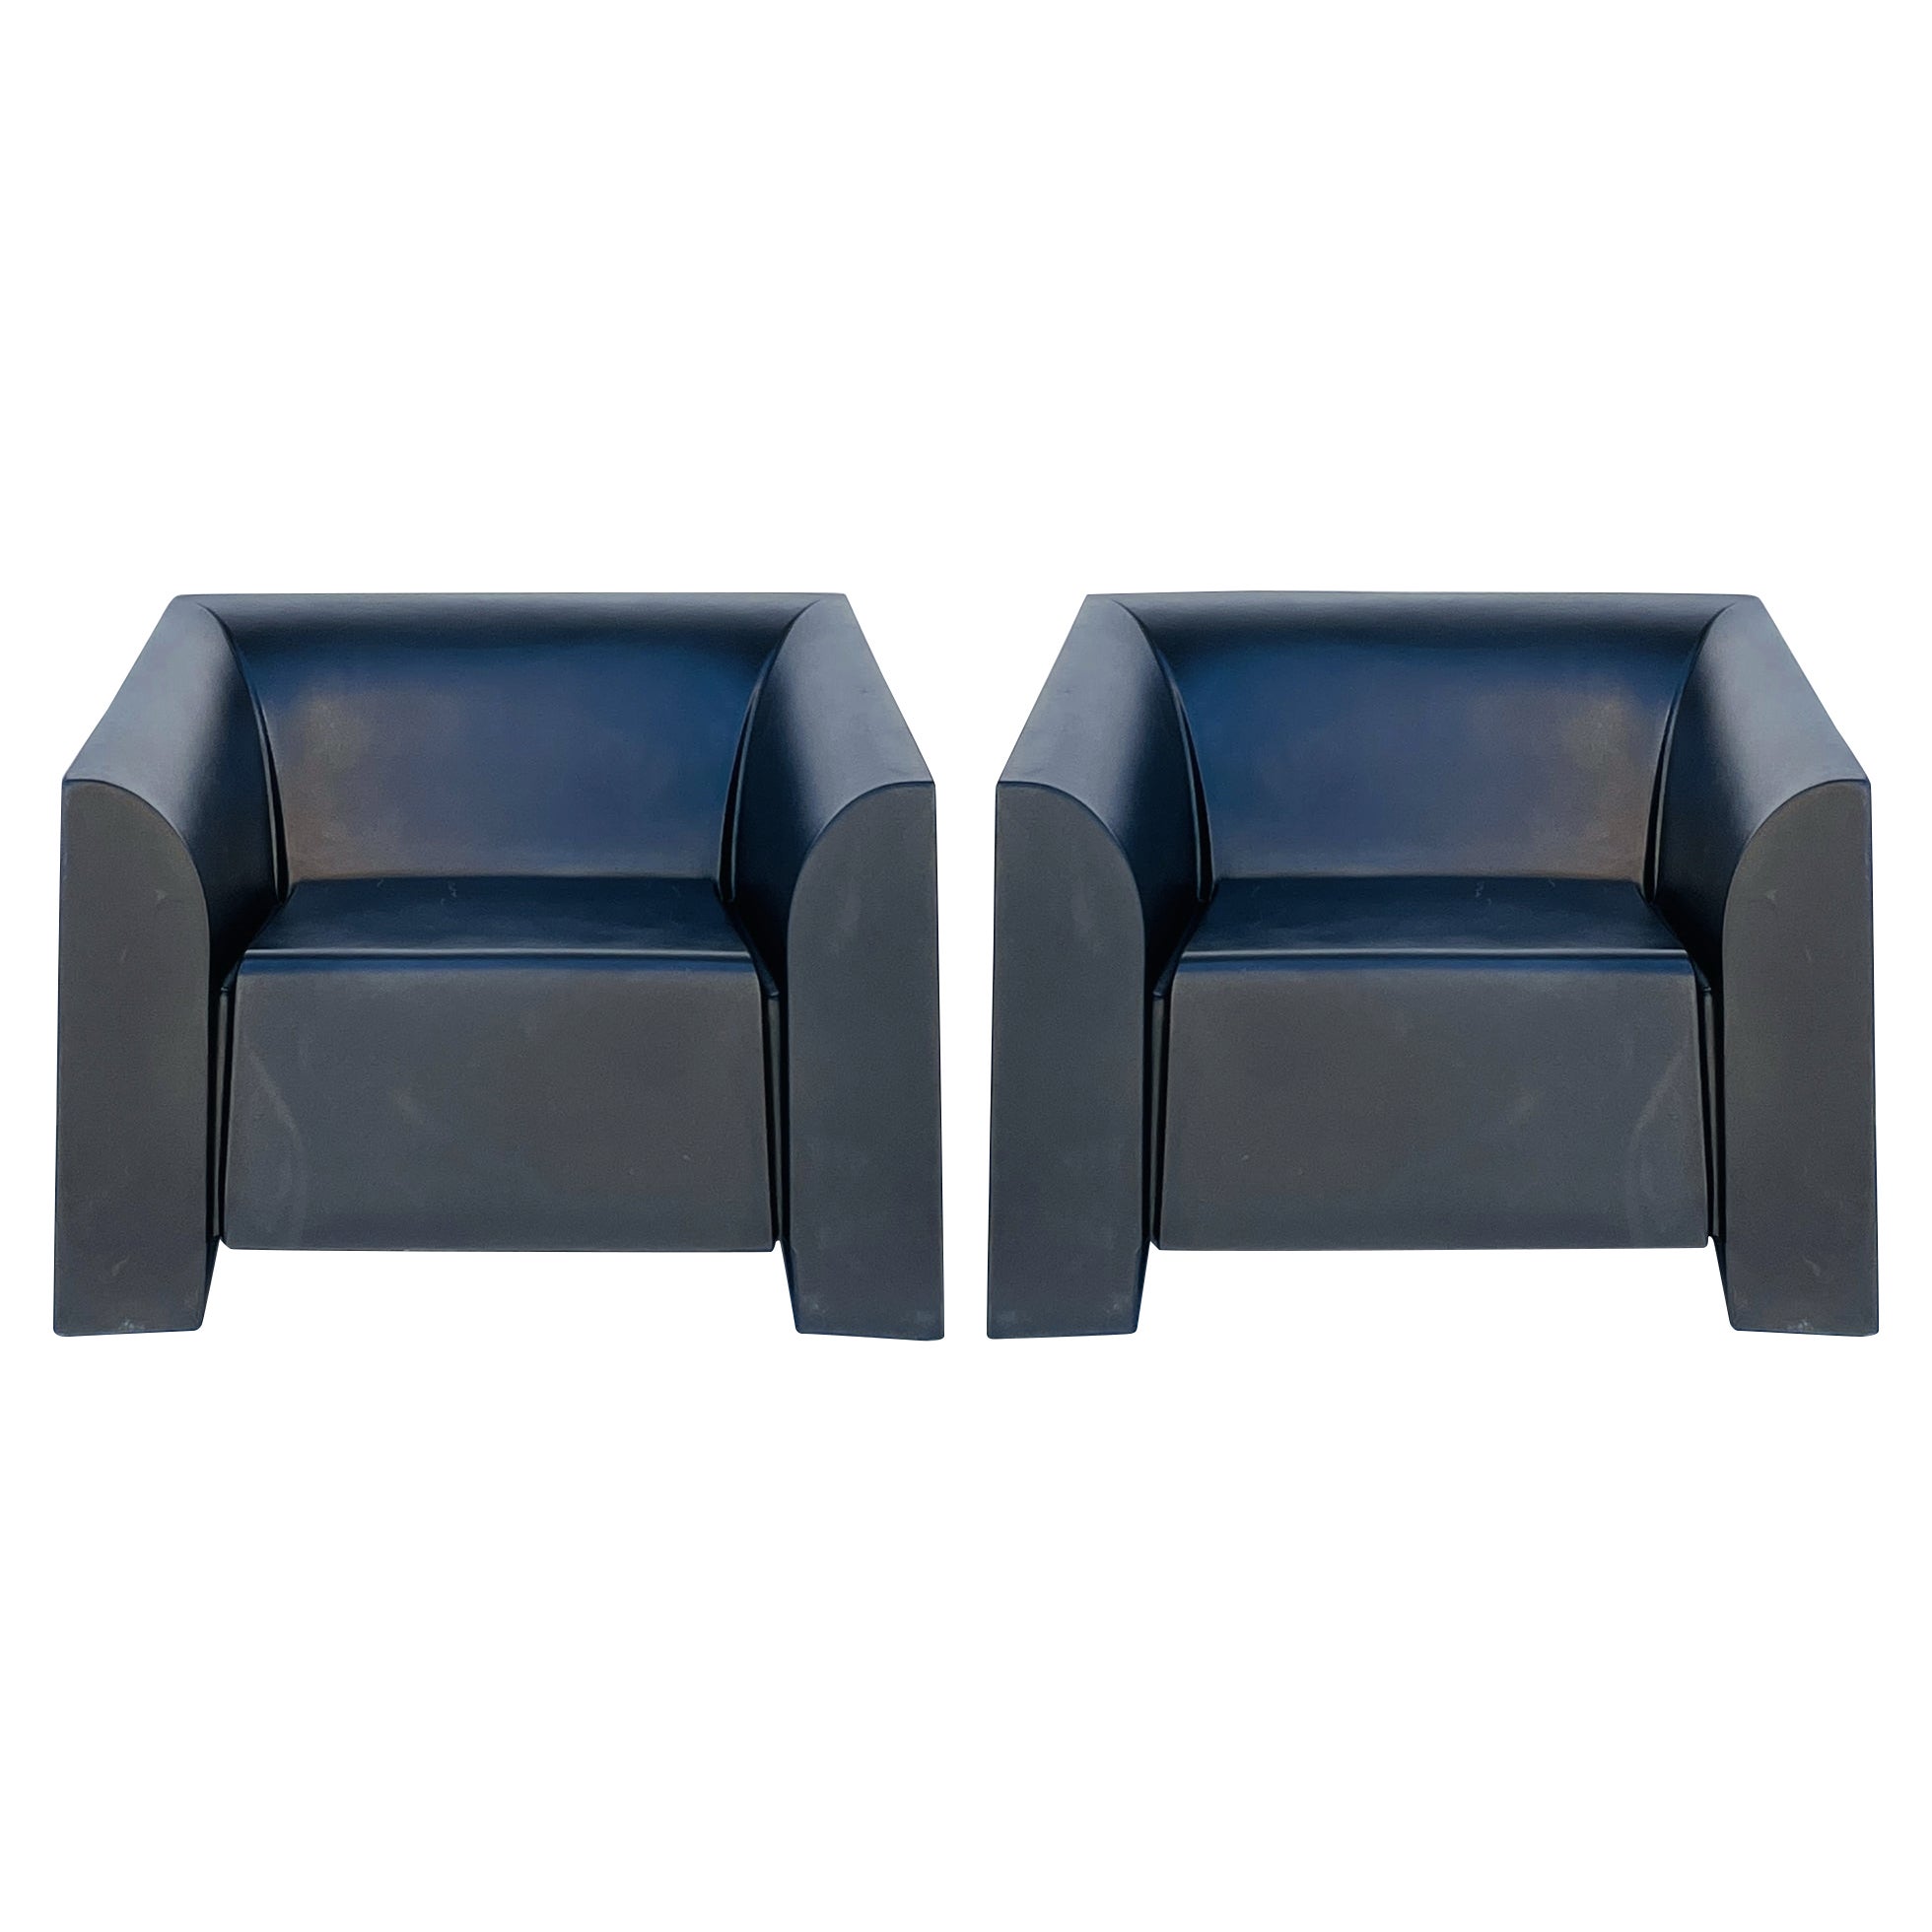 Pair of Mb1 Arm Chairs by Mario Bellini for Heller